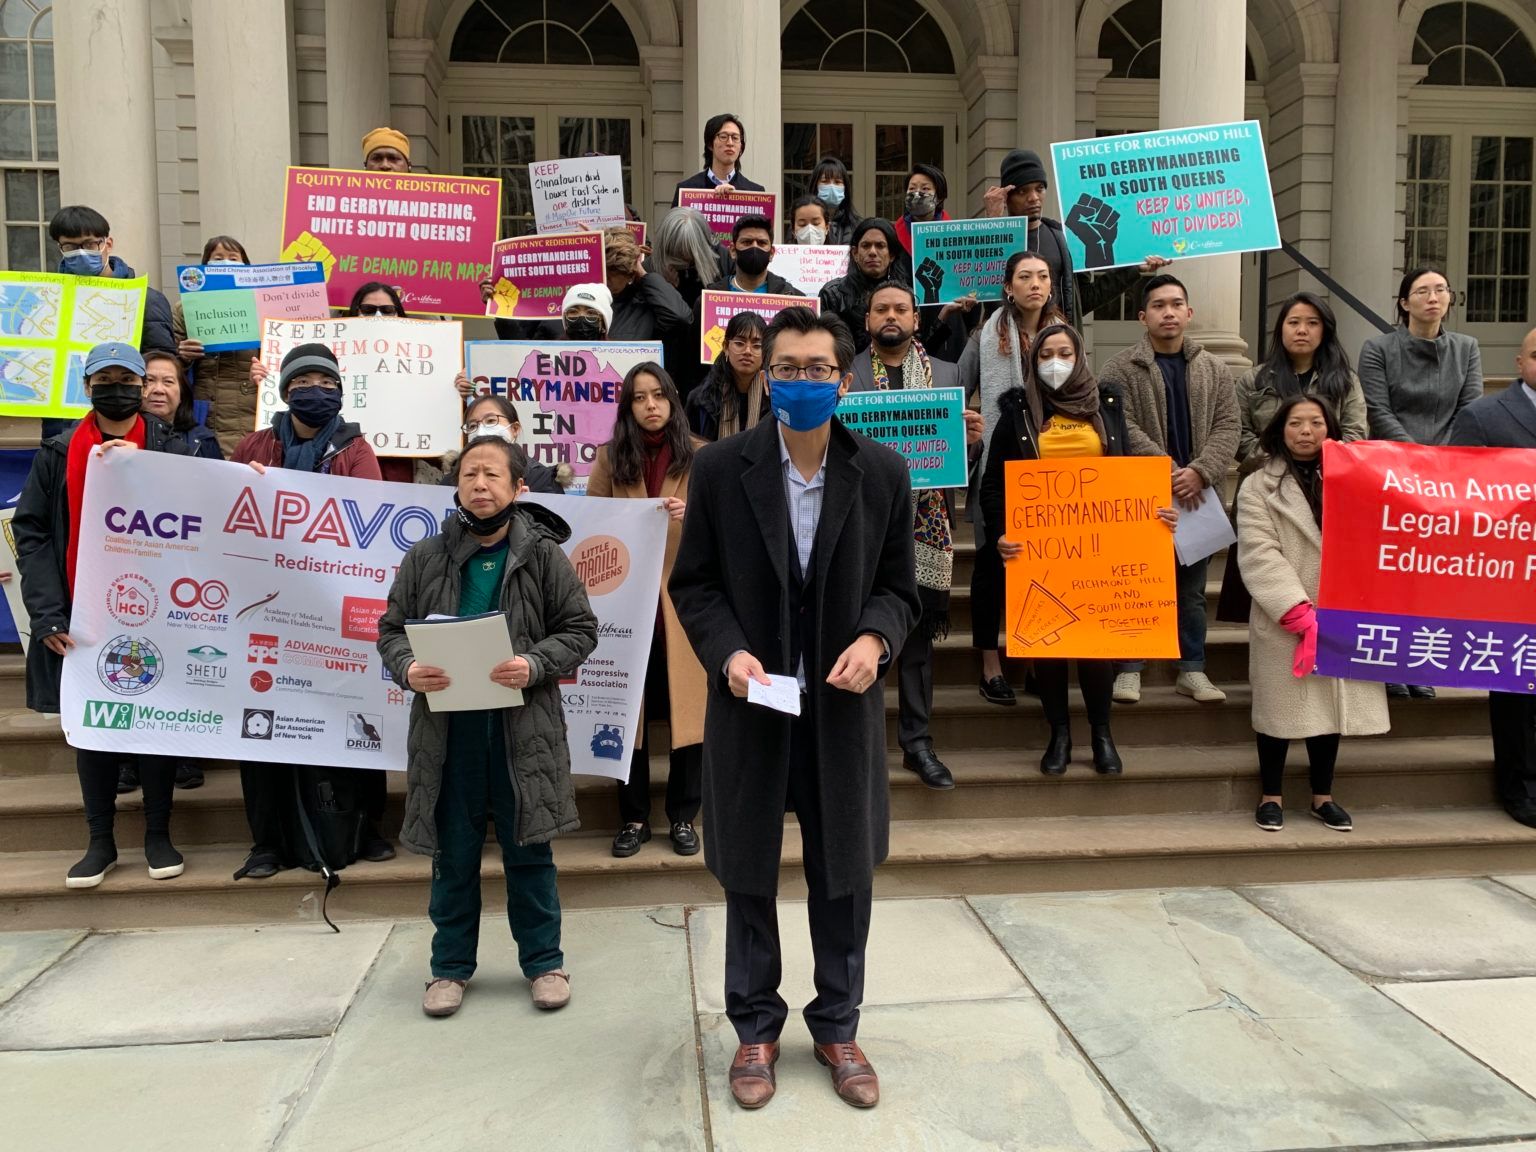 Image for PoliticsNY: Coalition of Asian organizations demand representation in city redistricting